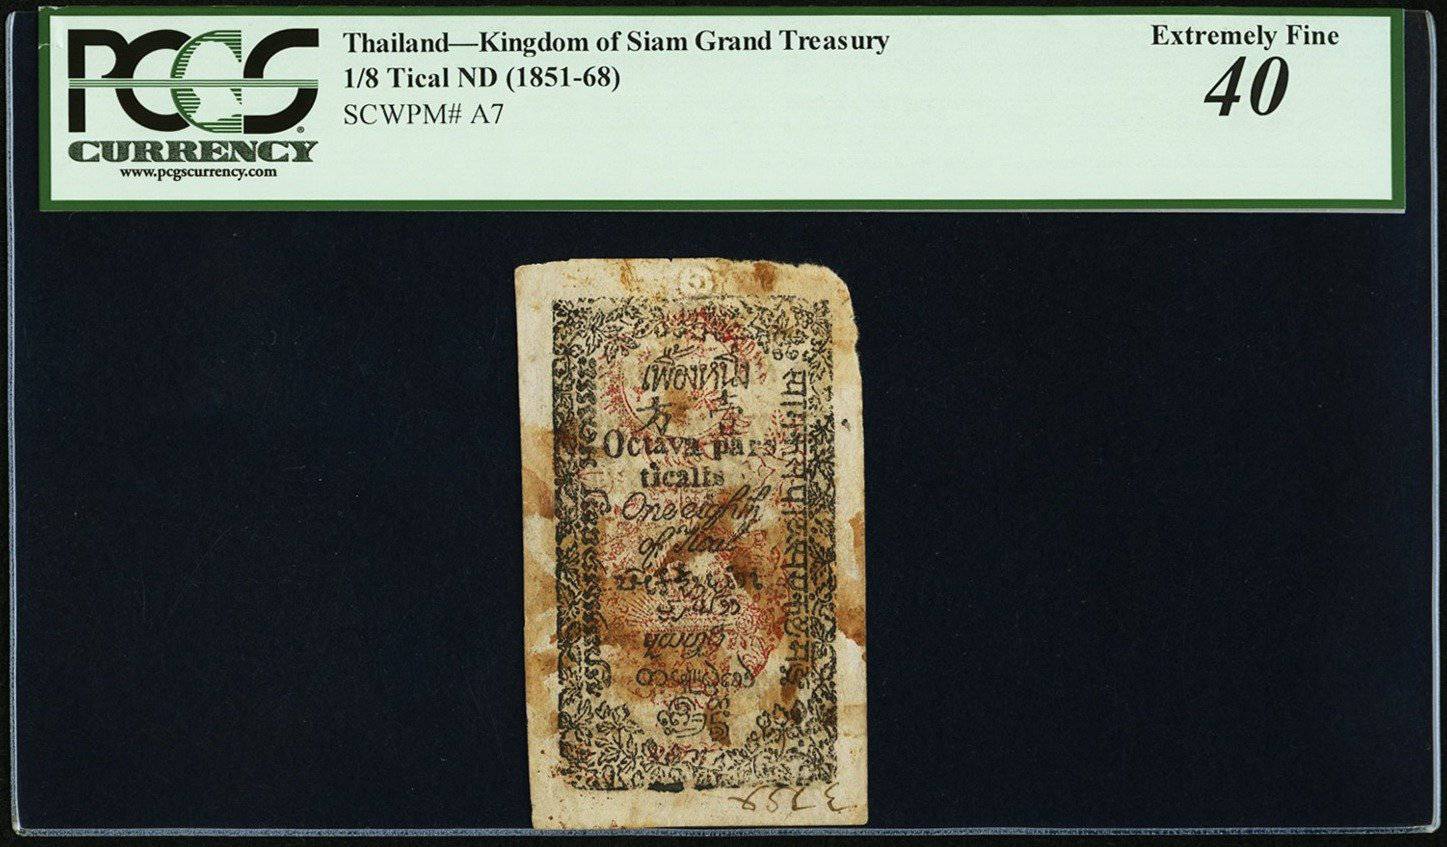 1851-1868 1/8  Tical Note - Kingdom of Siam Grand Treasury ND Pick A7 PCGS EF40 - Hard Asset Management, Inc